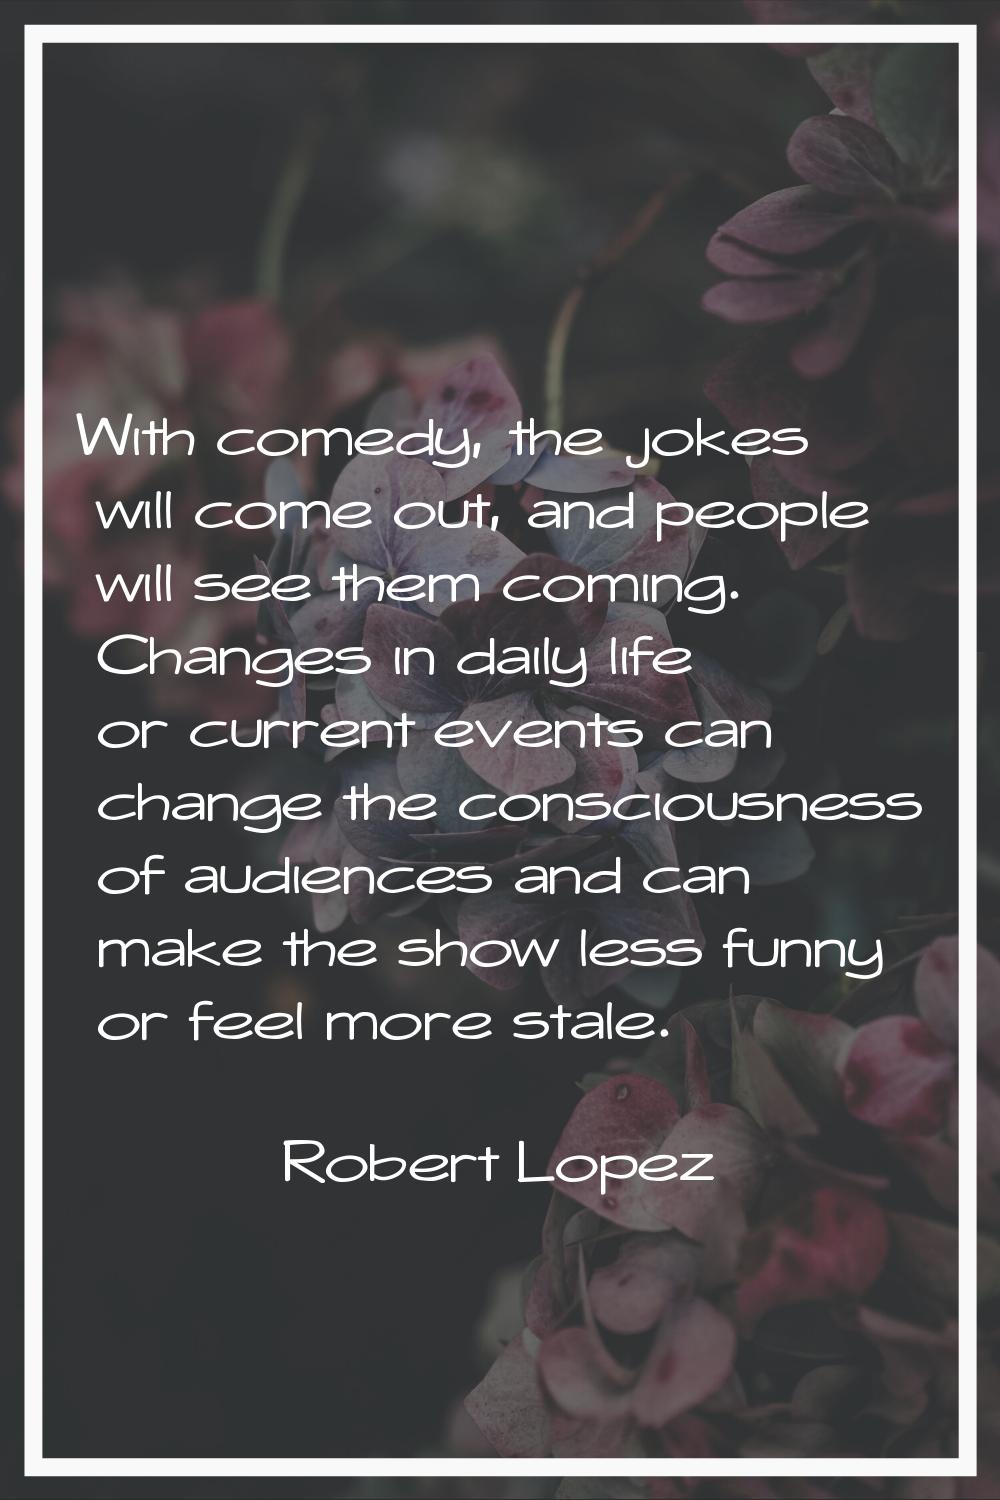 With comedy, the jokes will come out, and people will see them coming. Changes in daily life or cur